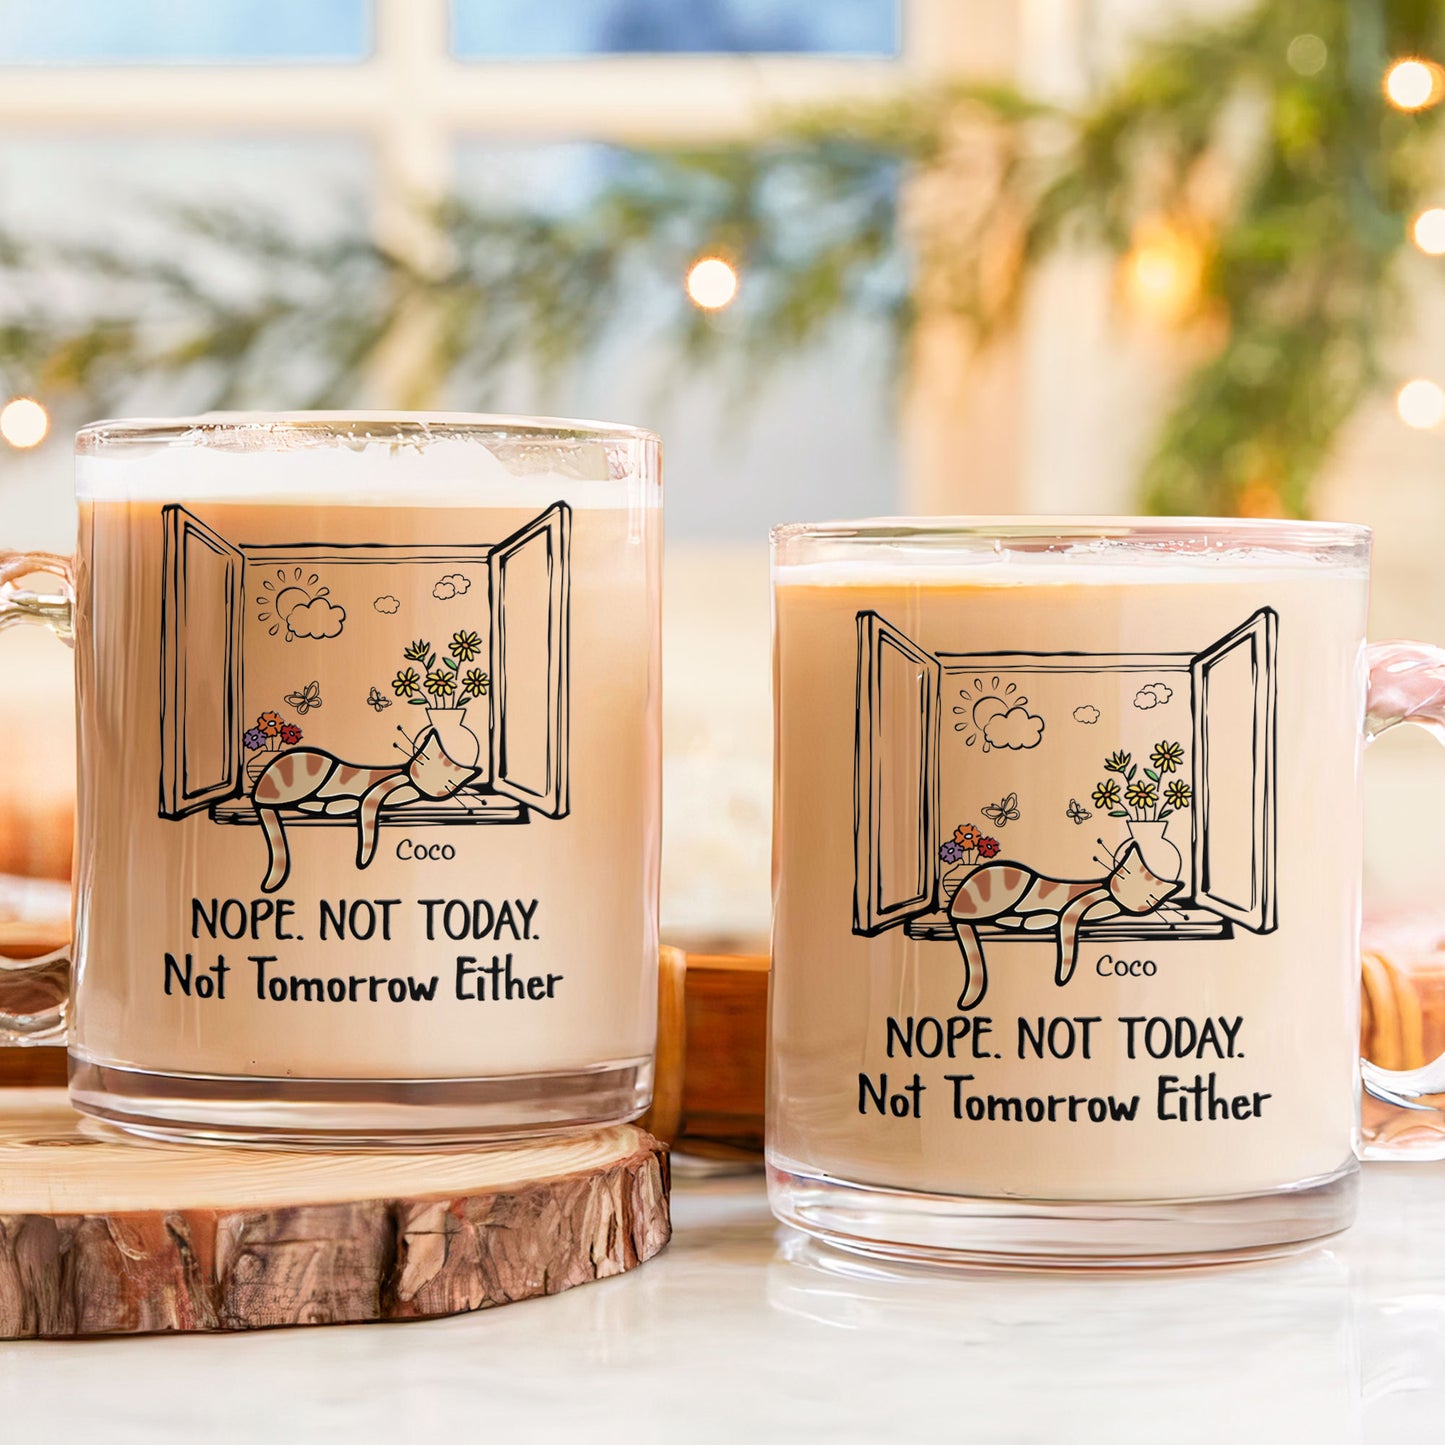 Nope. Not Today. - Personalized Glass Mug